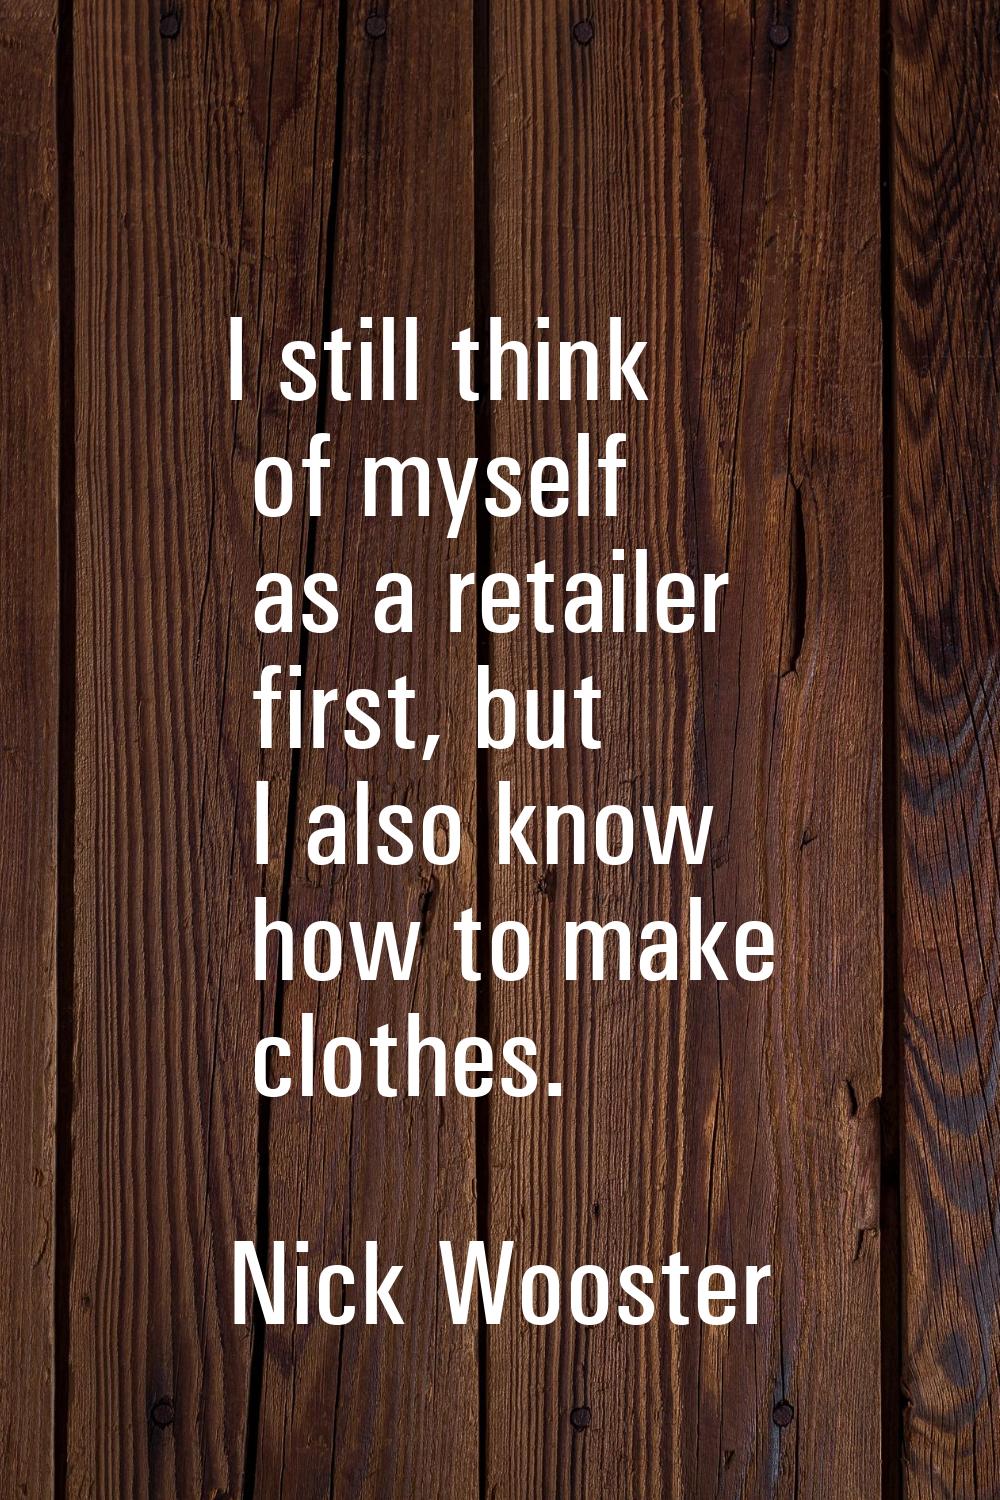 I still think of myself as a retailer first, but I also know how to make clothes.